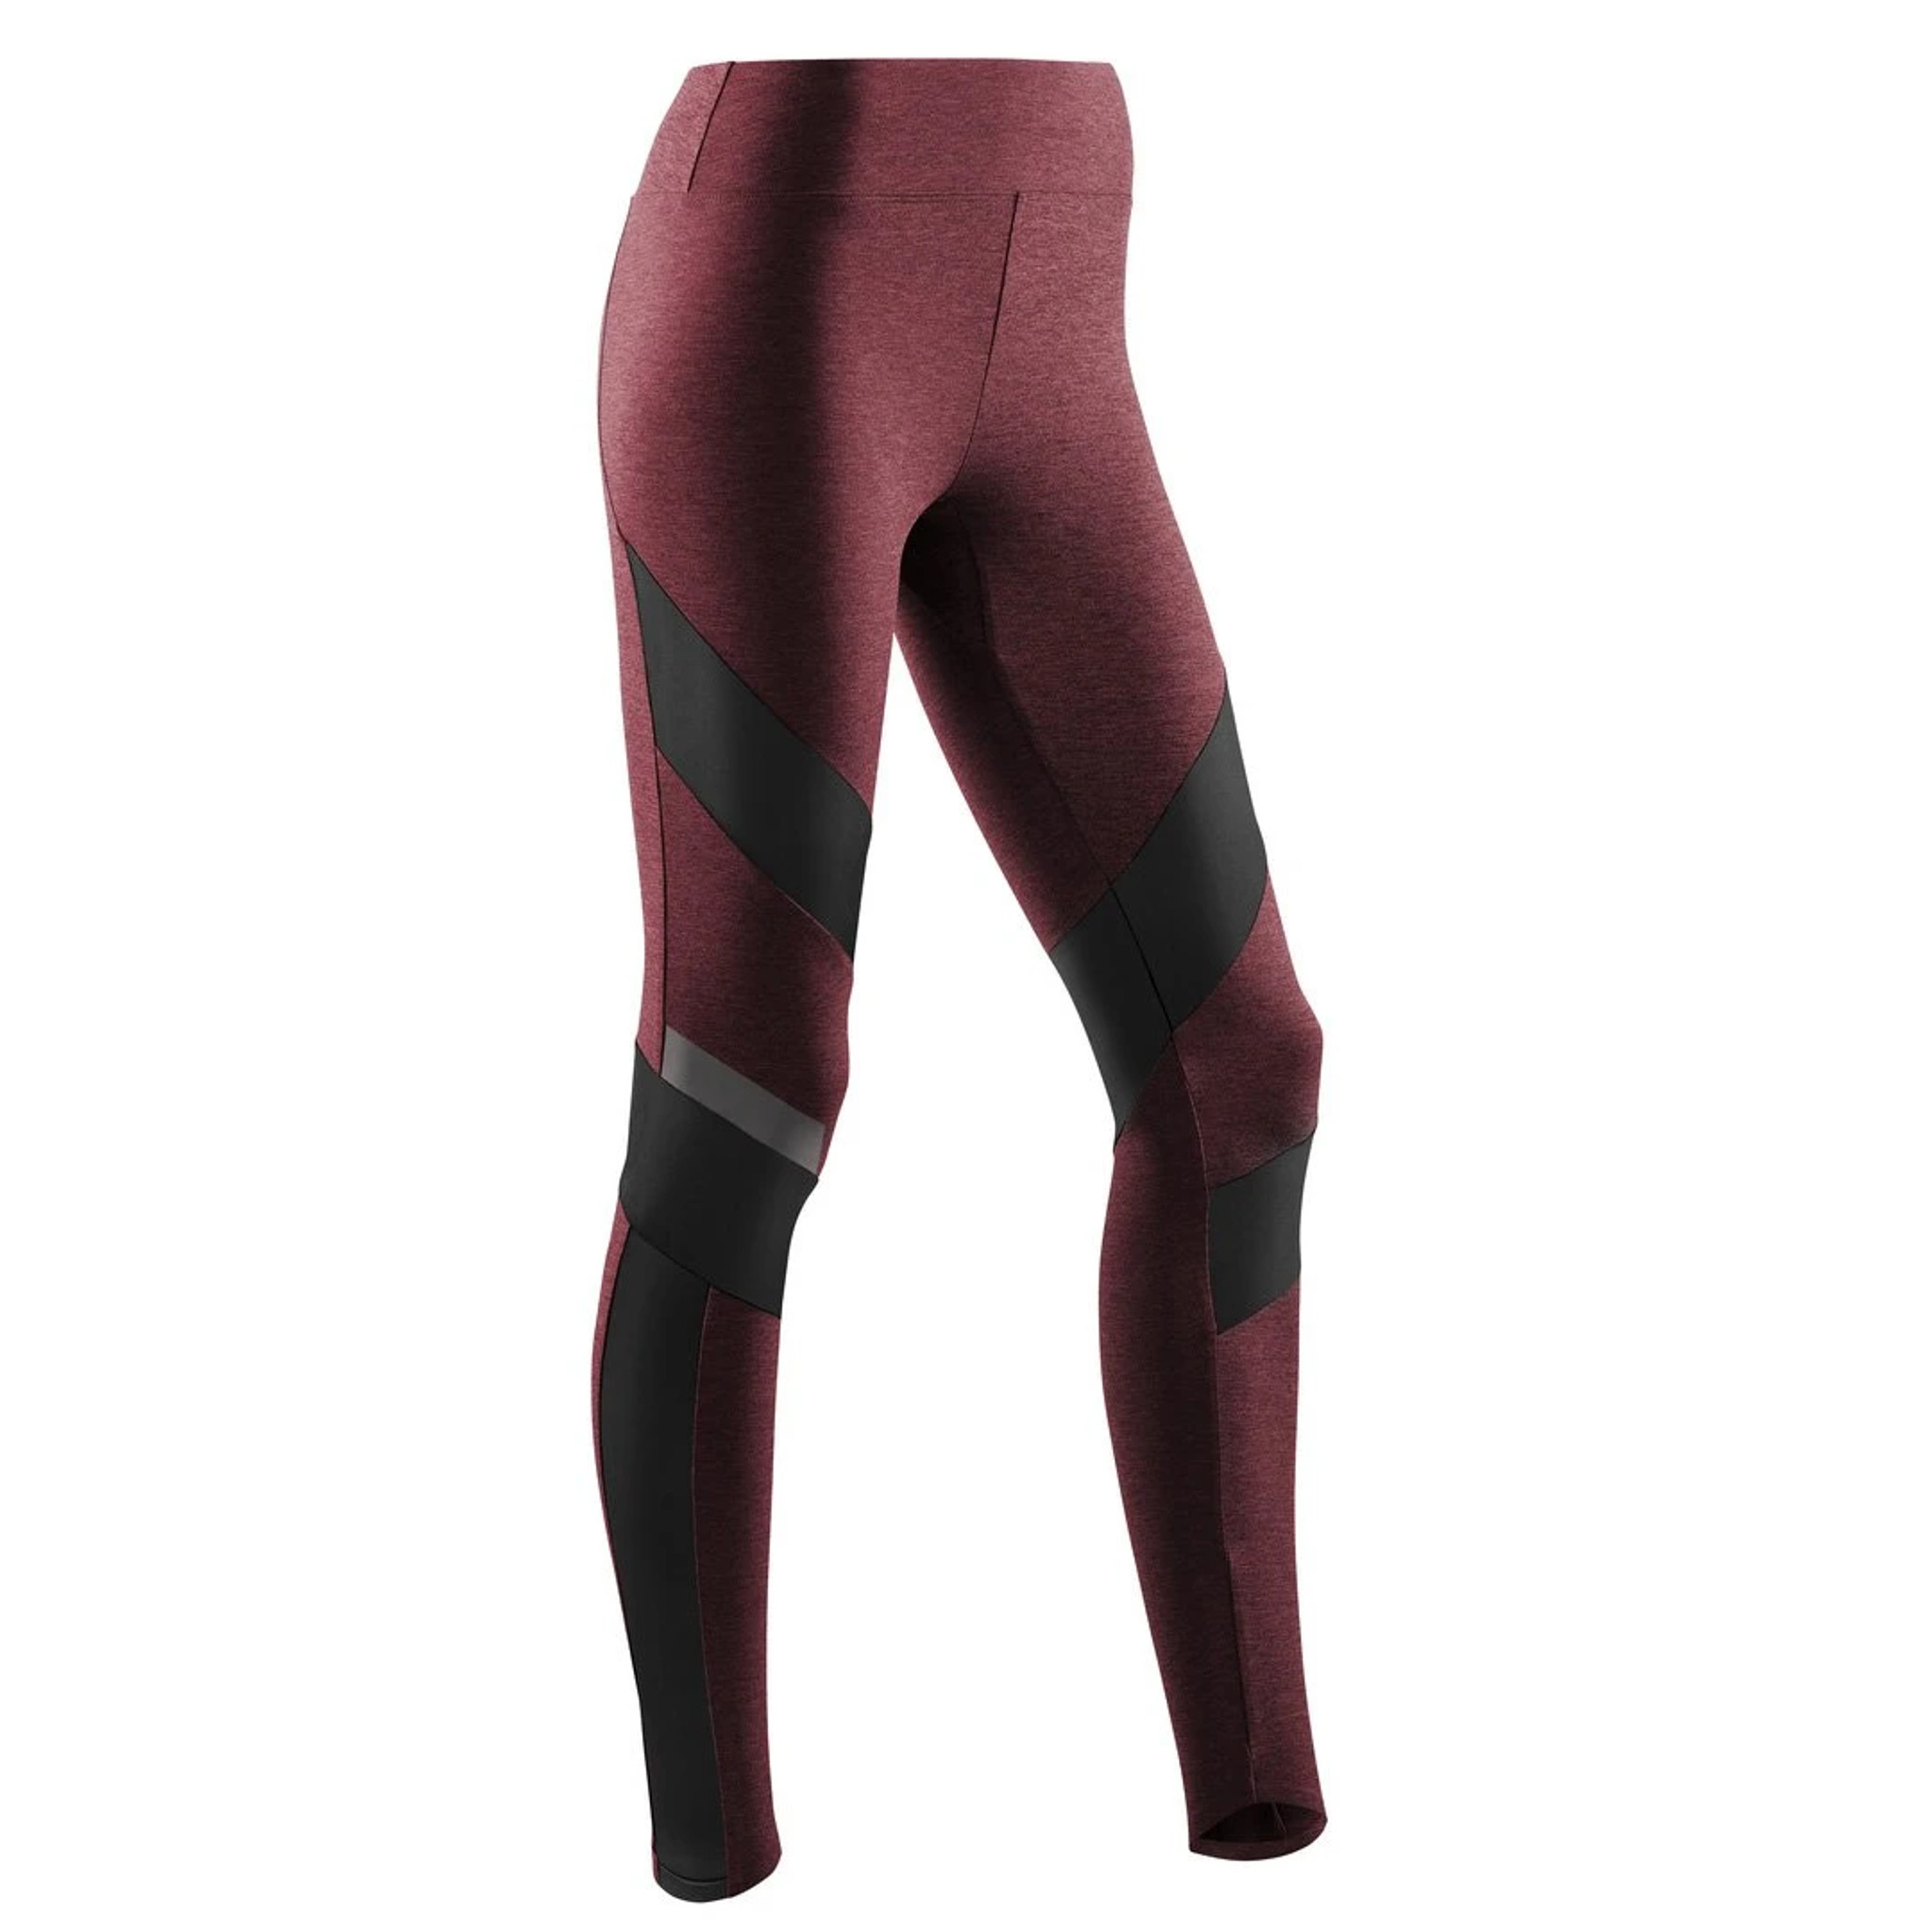 https://cdn11.bigcommerce.com/s-79bvd/images/stencil/2048x2048/products/37599/57295/Training-Tights-cardiocherry-W0H98L-w-front_1800x1800__77863.1624387155.jpg?c=2